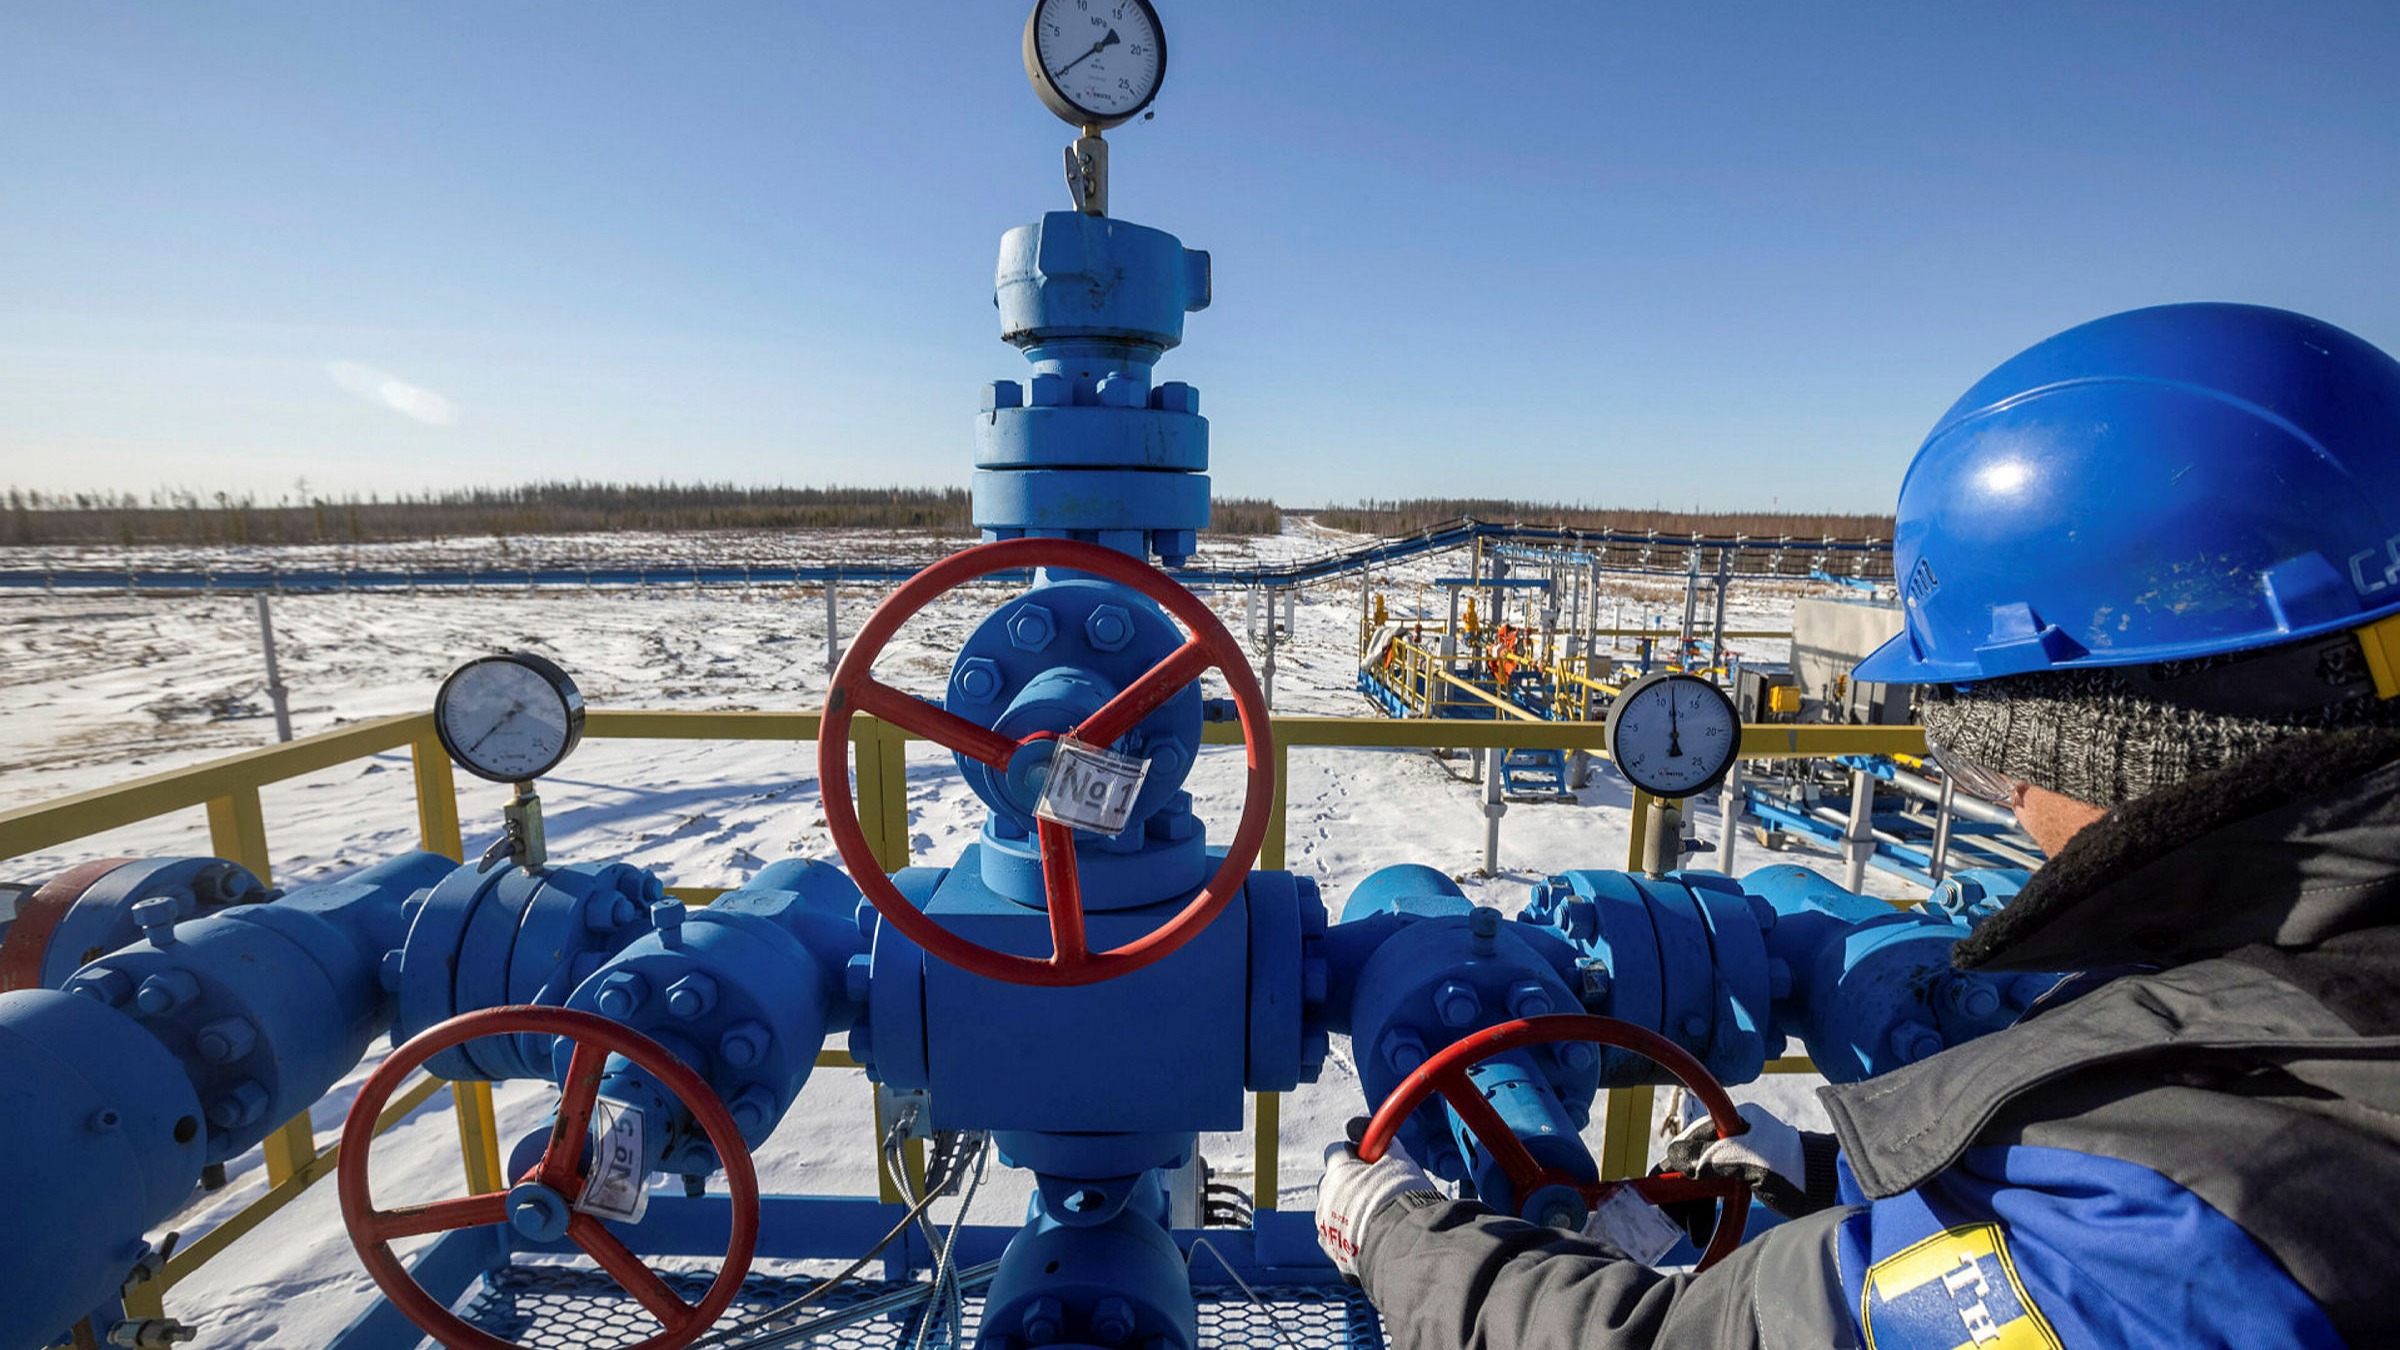 ft.com - James Fernyhough - Russia to permanently 'decouple' with west on energy, gas producers say